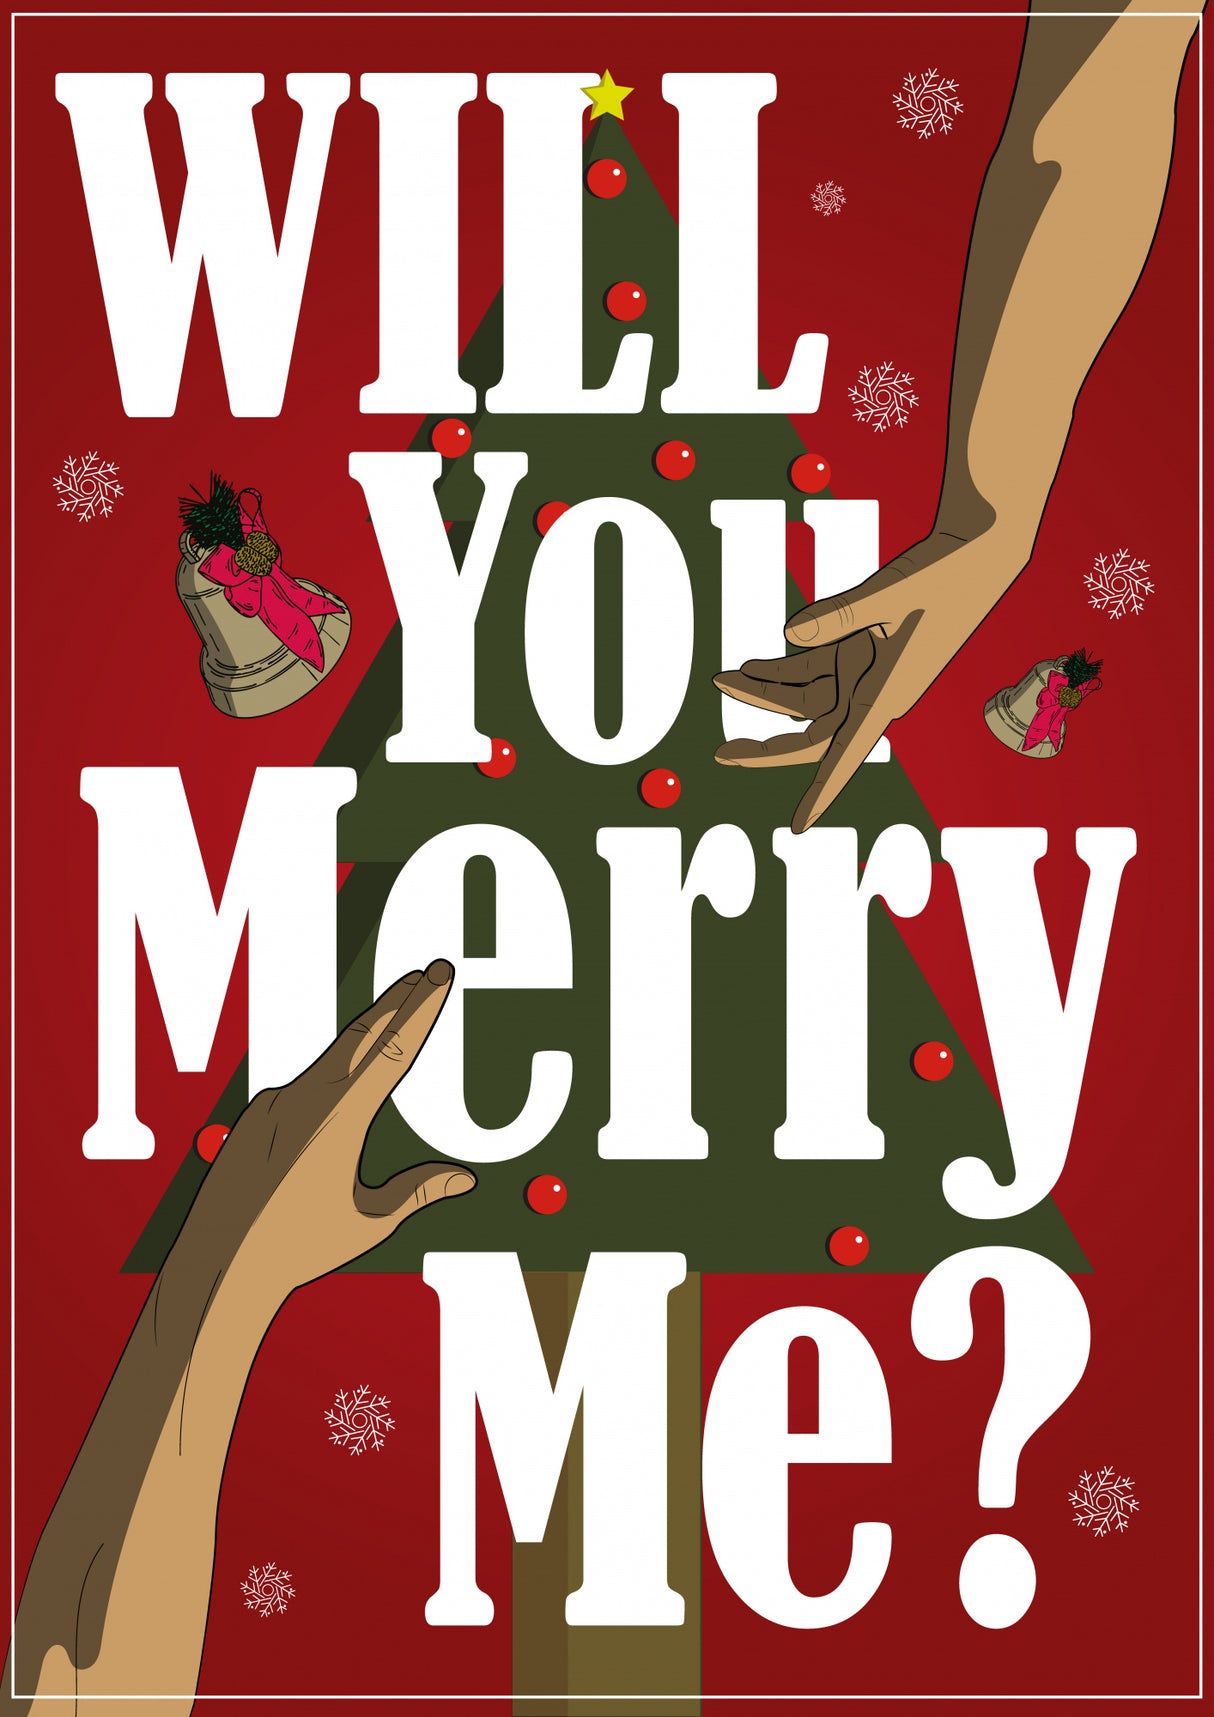 will you merry me Poster och Canvastavla